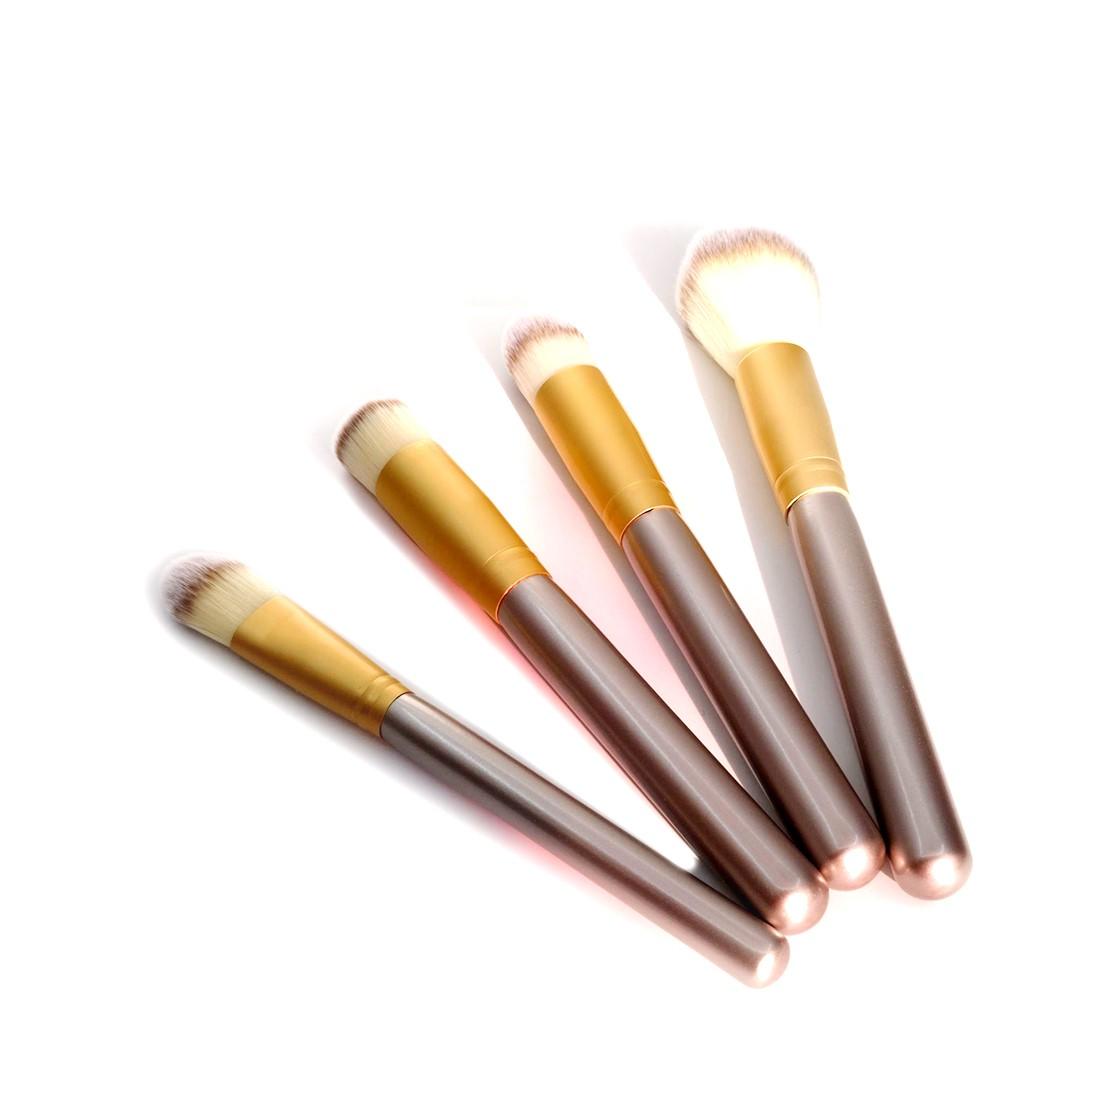 Suprabeauty sp foundation brush set with curved synthetic hair for students